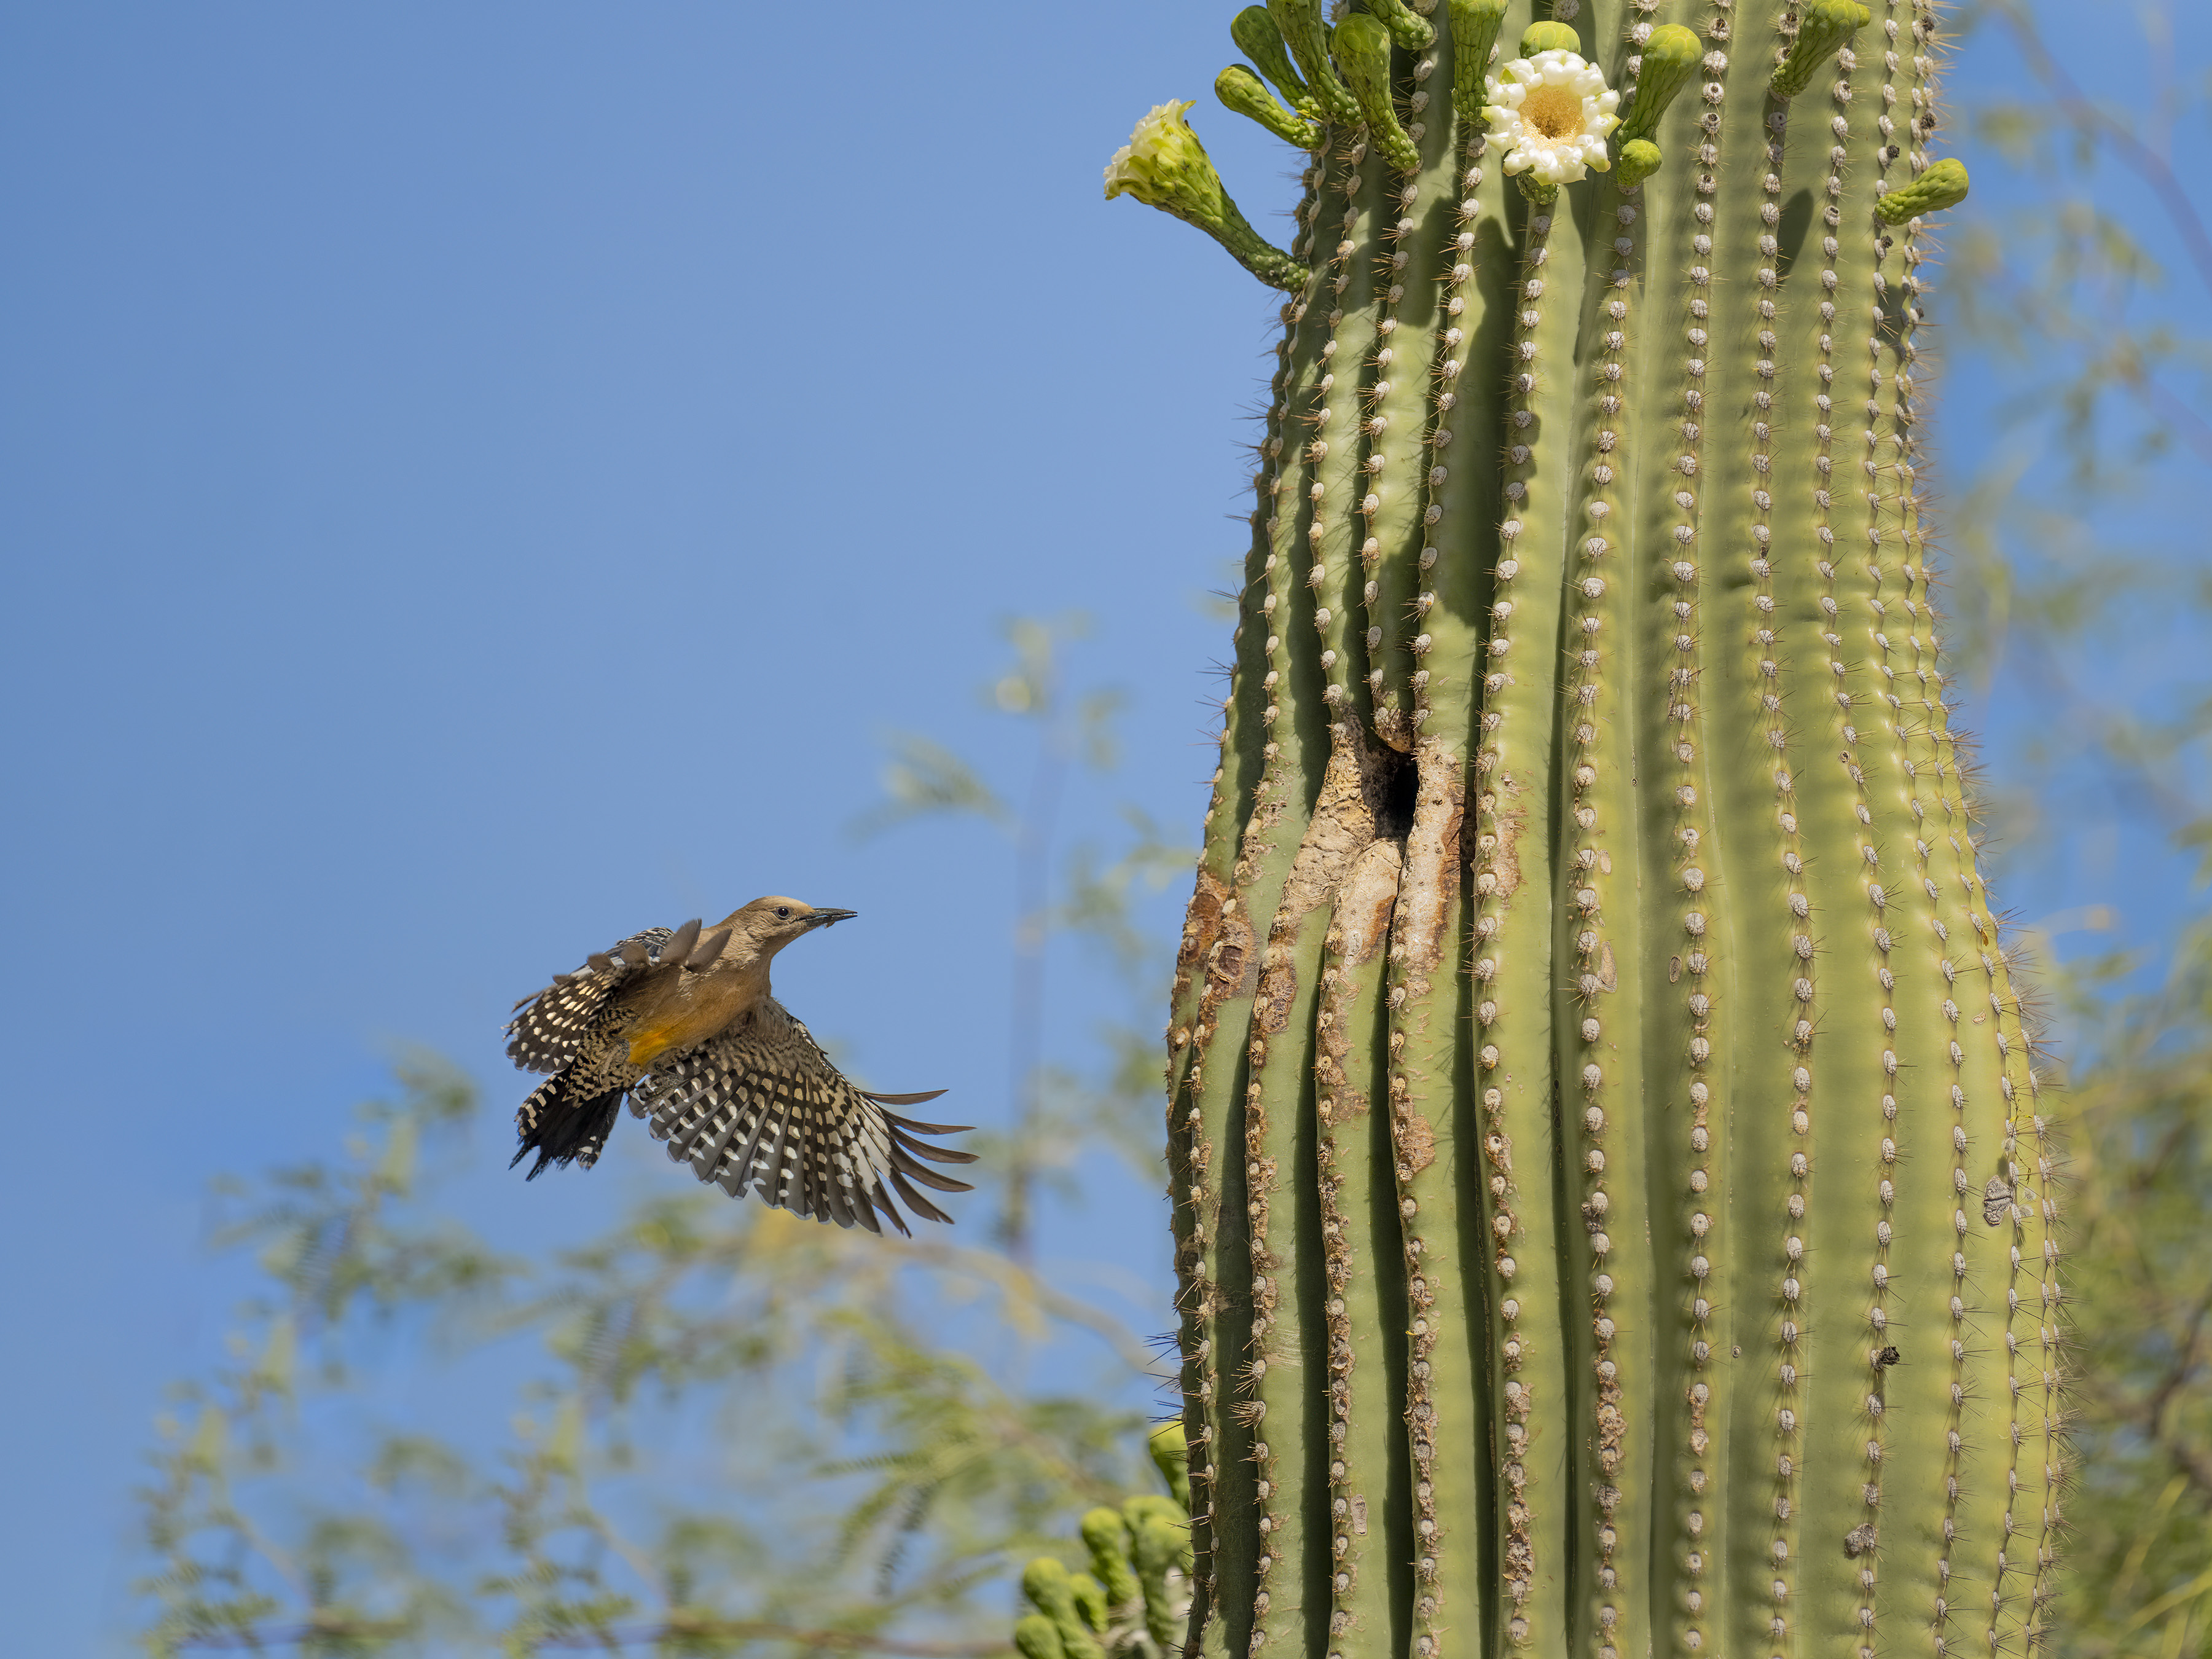 Photo by David C Ring  |  This female Gila Woodpecker brings food back to its young nesting in this Saguaro on our property. Both the male and the female continued this activity throughout the day.